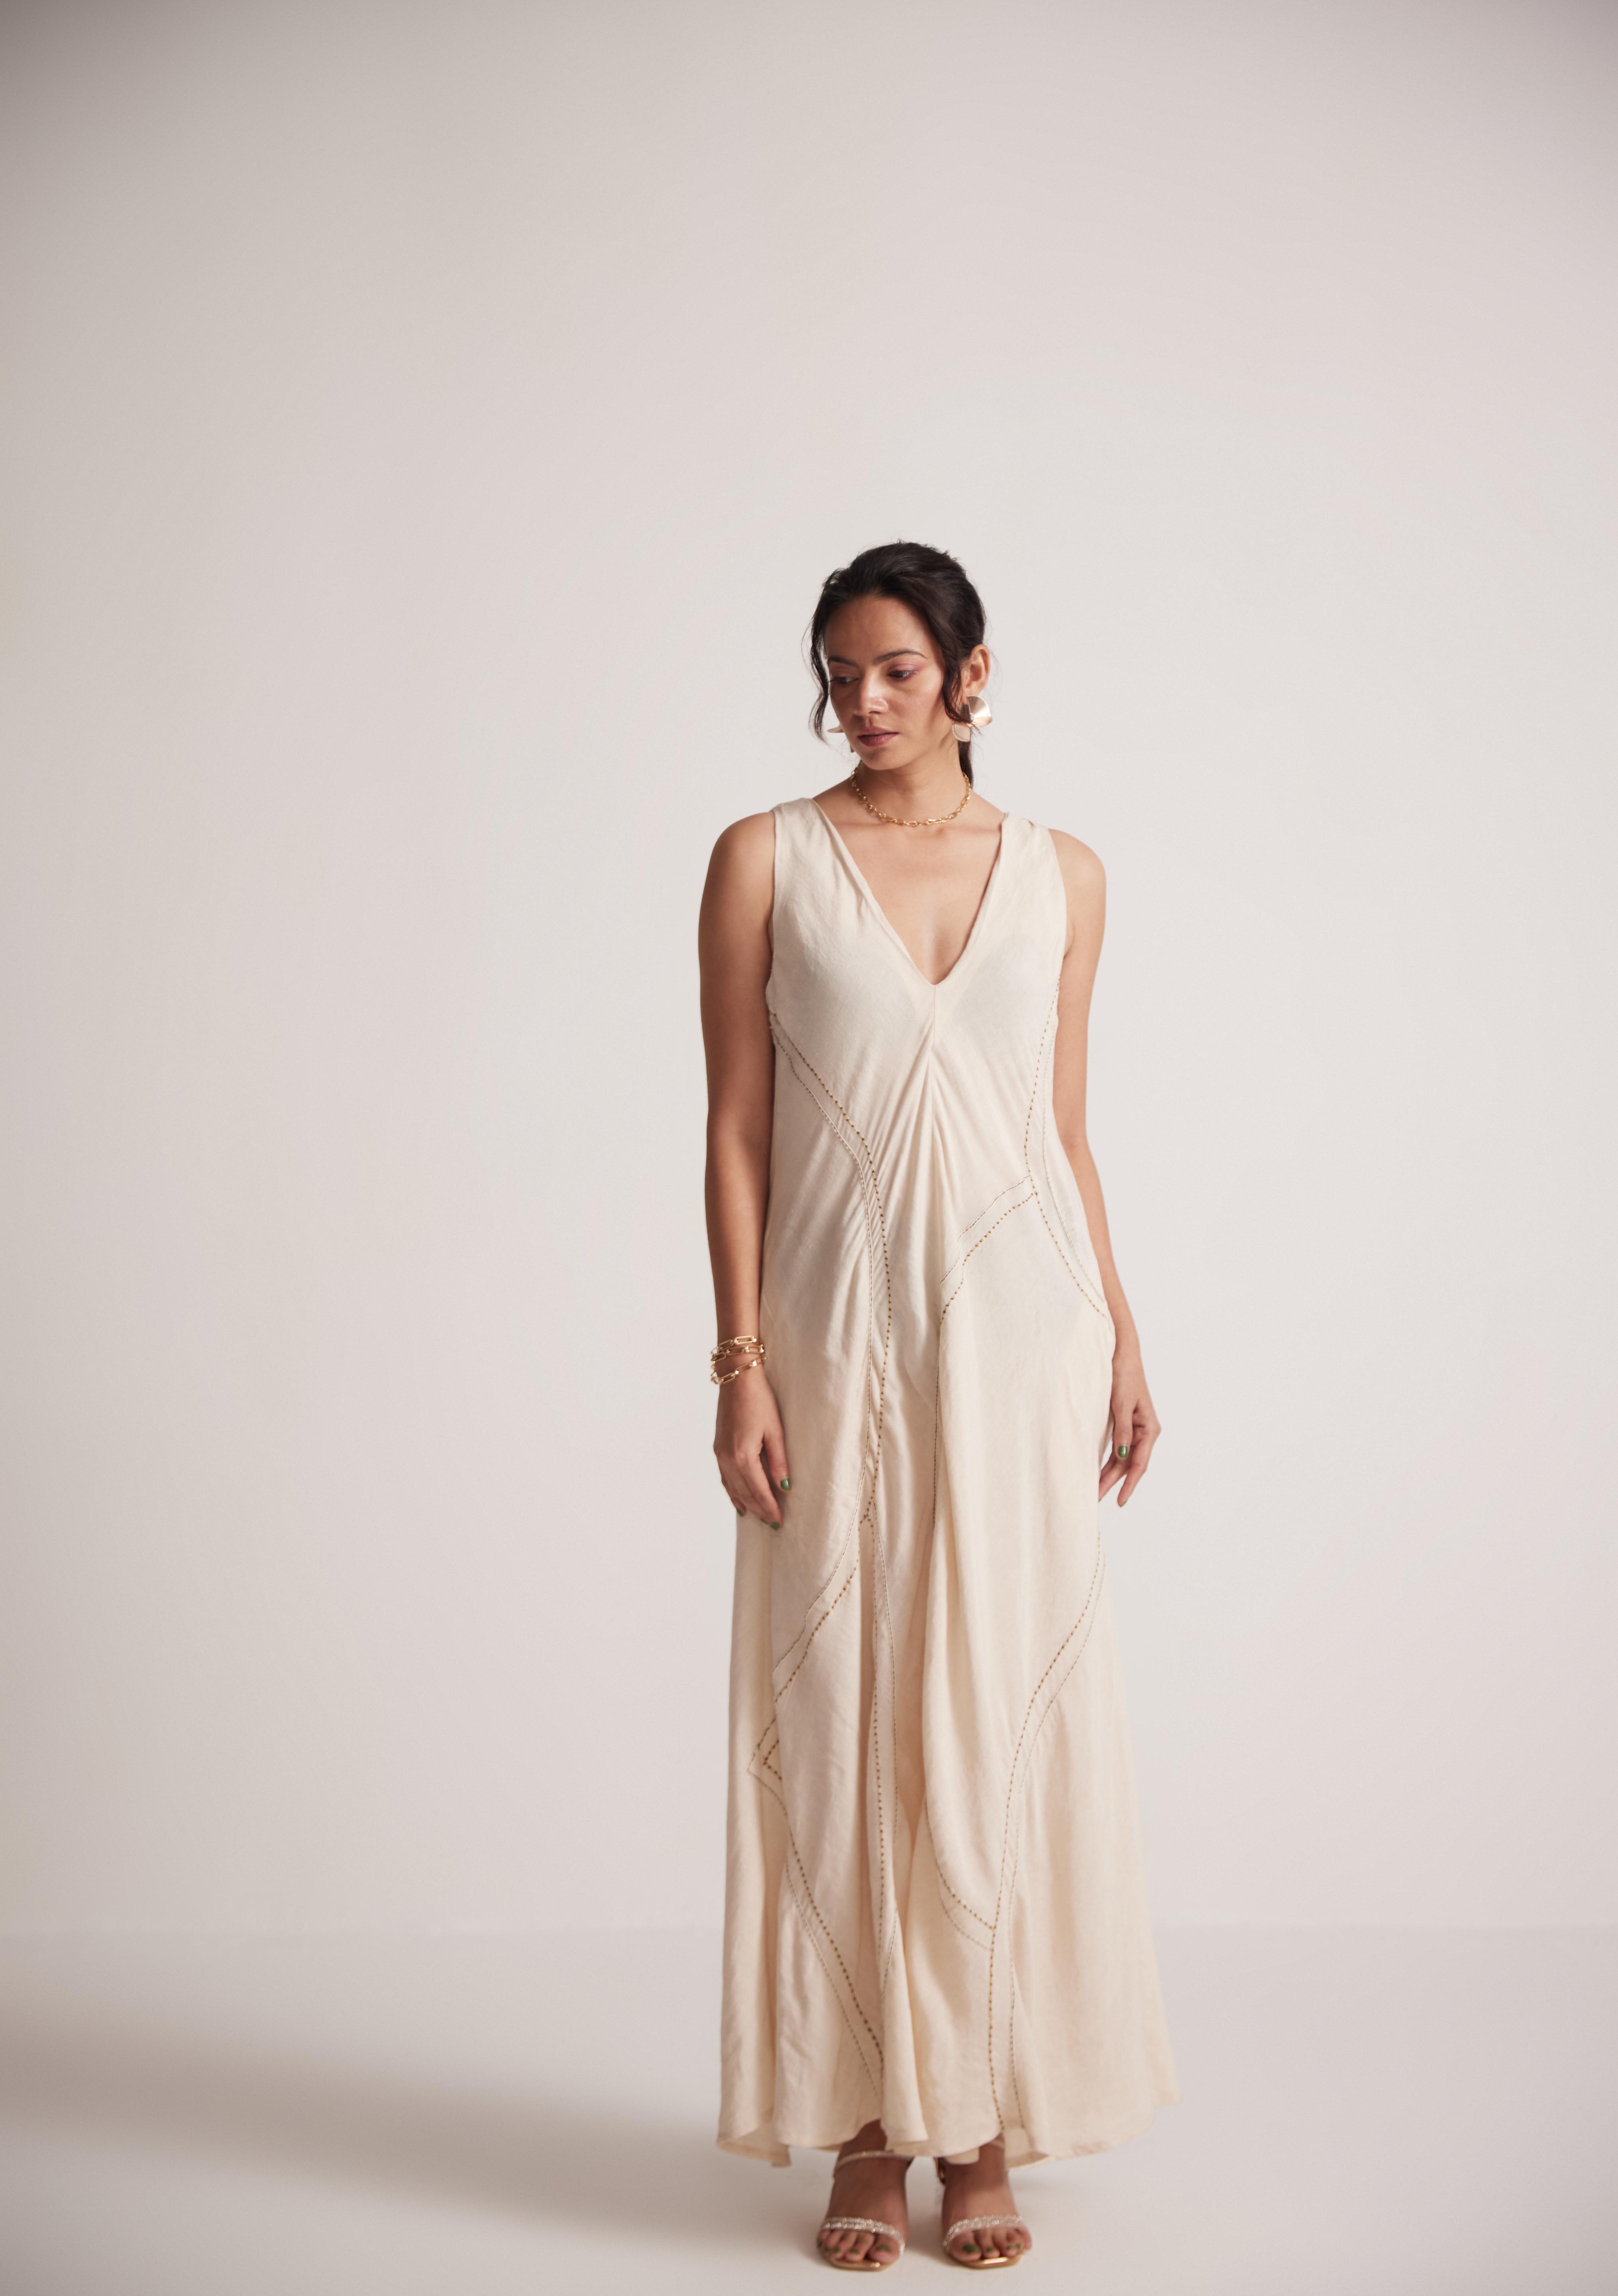 Off-White Event Wear Long Dress with Front Lace Embroidery and Pockets - Western Era  Embroidery